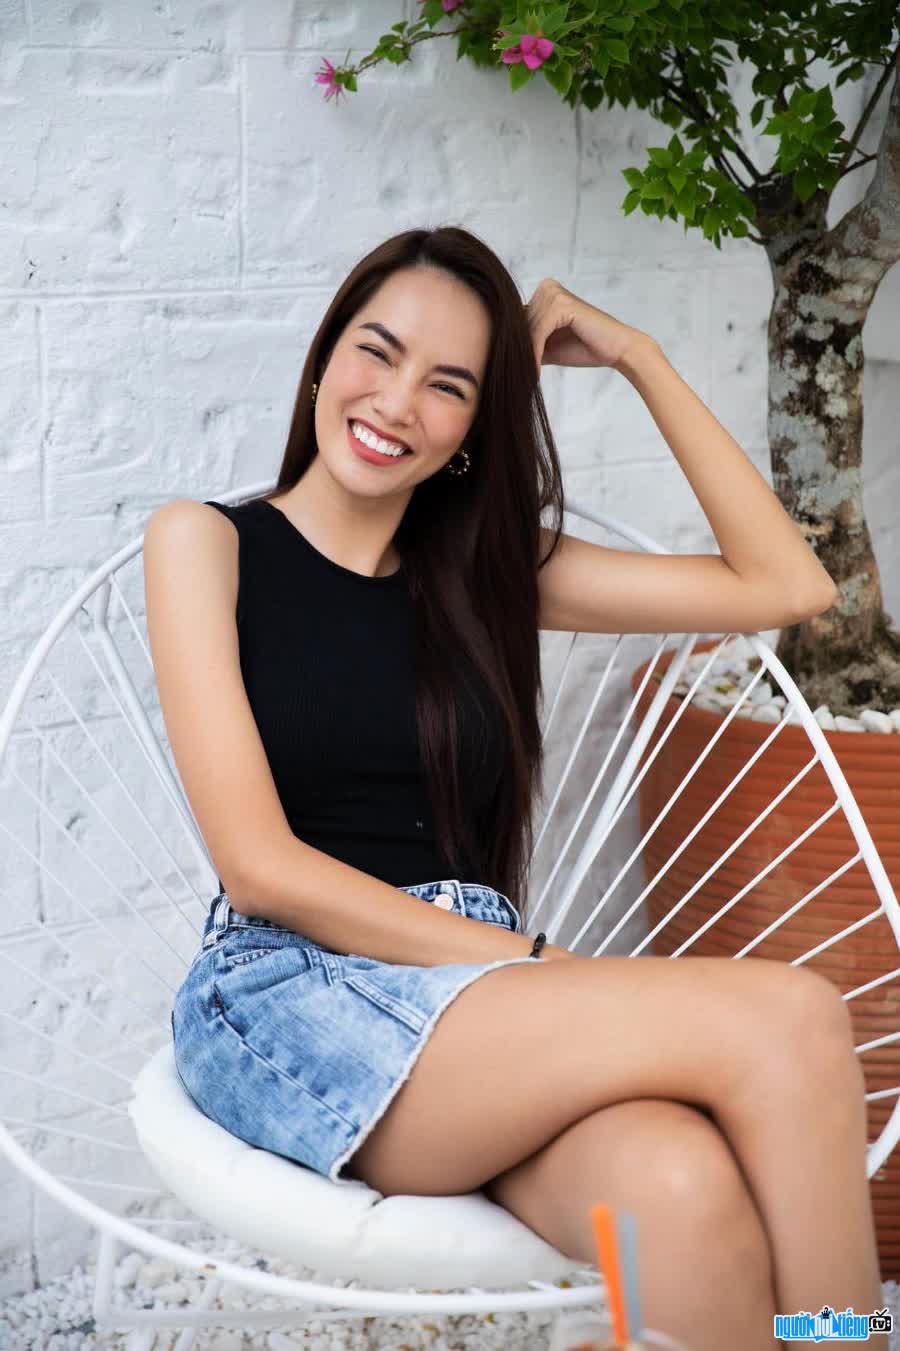  Hotgirl image of Le Hoang Phuong with a sunny smile